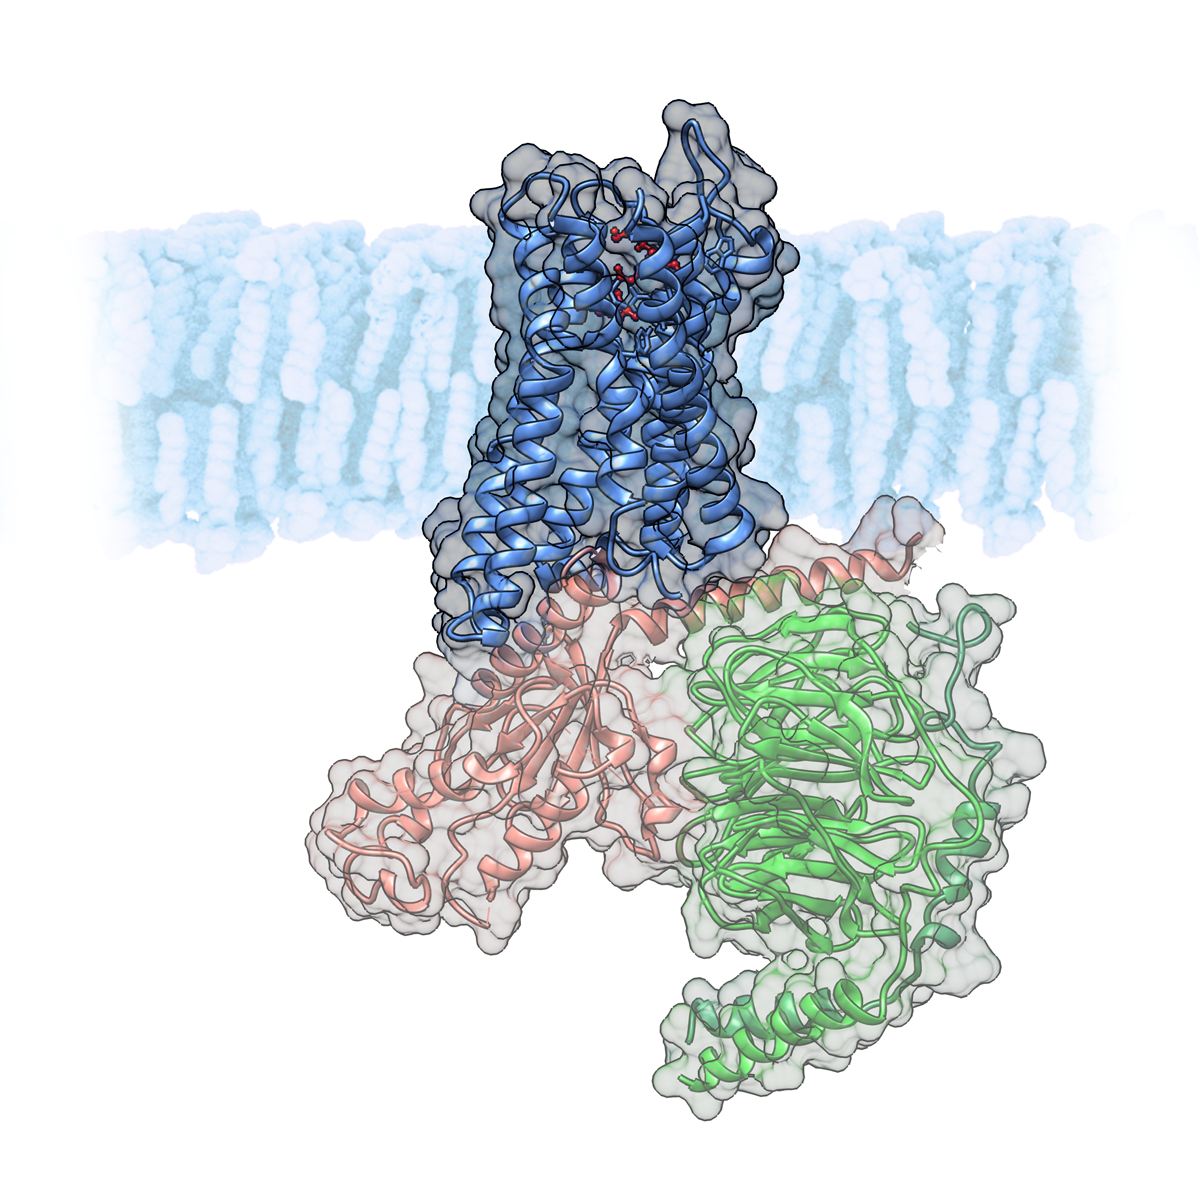 G protein-coupled receptor from PDB structure 6dde